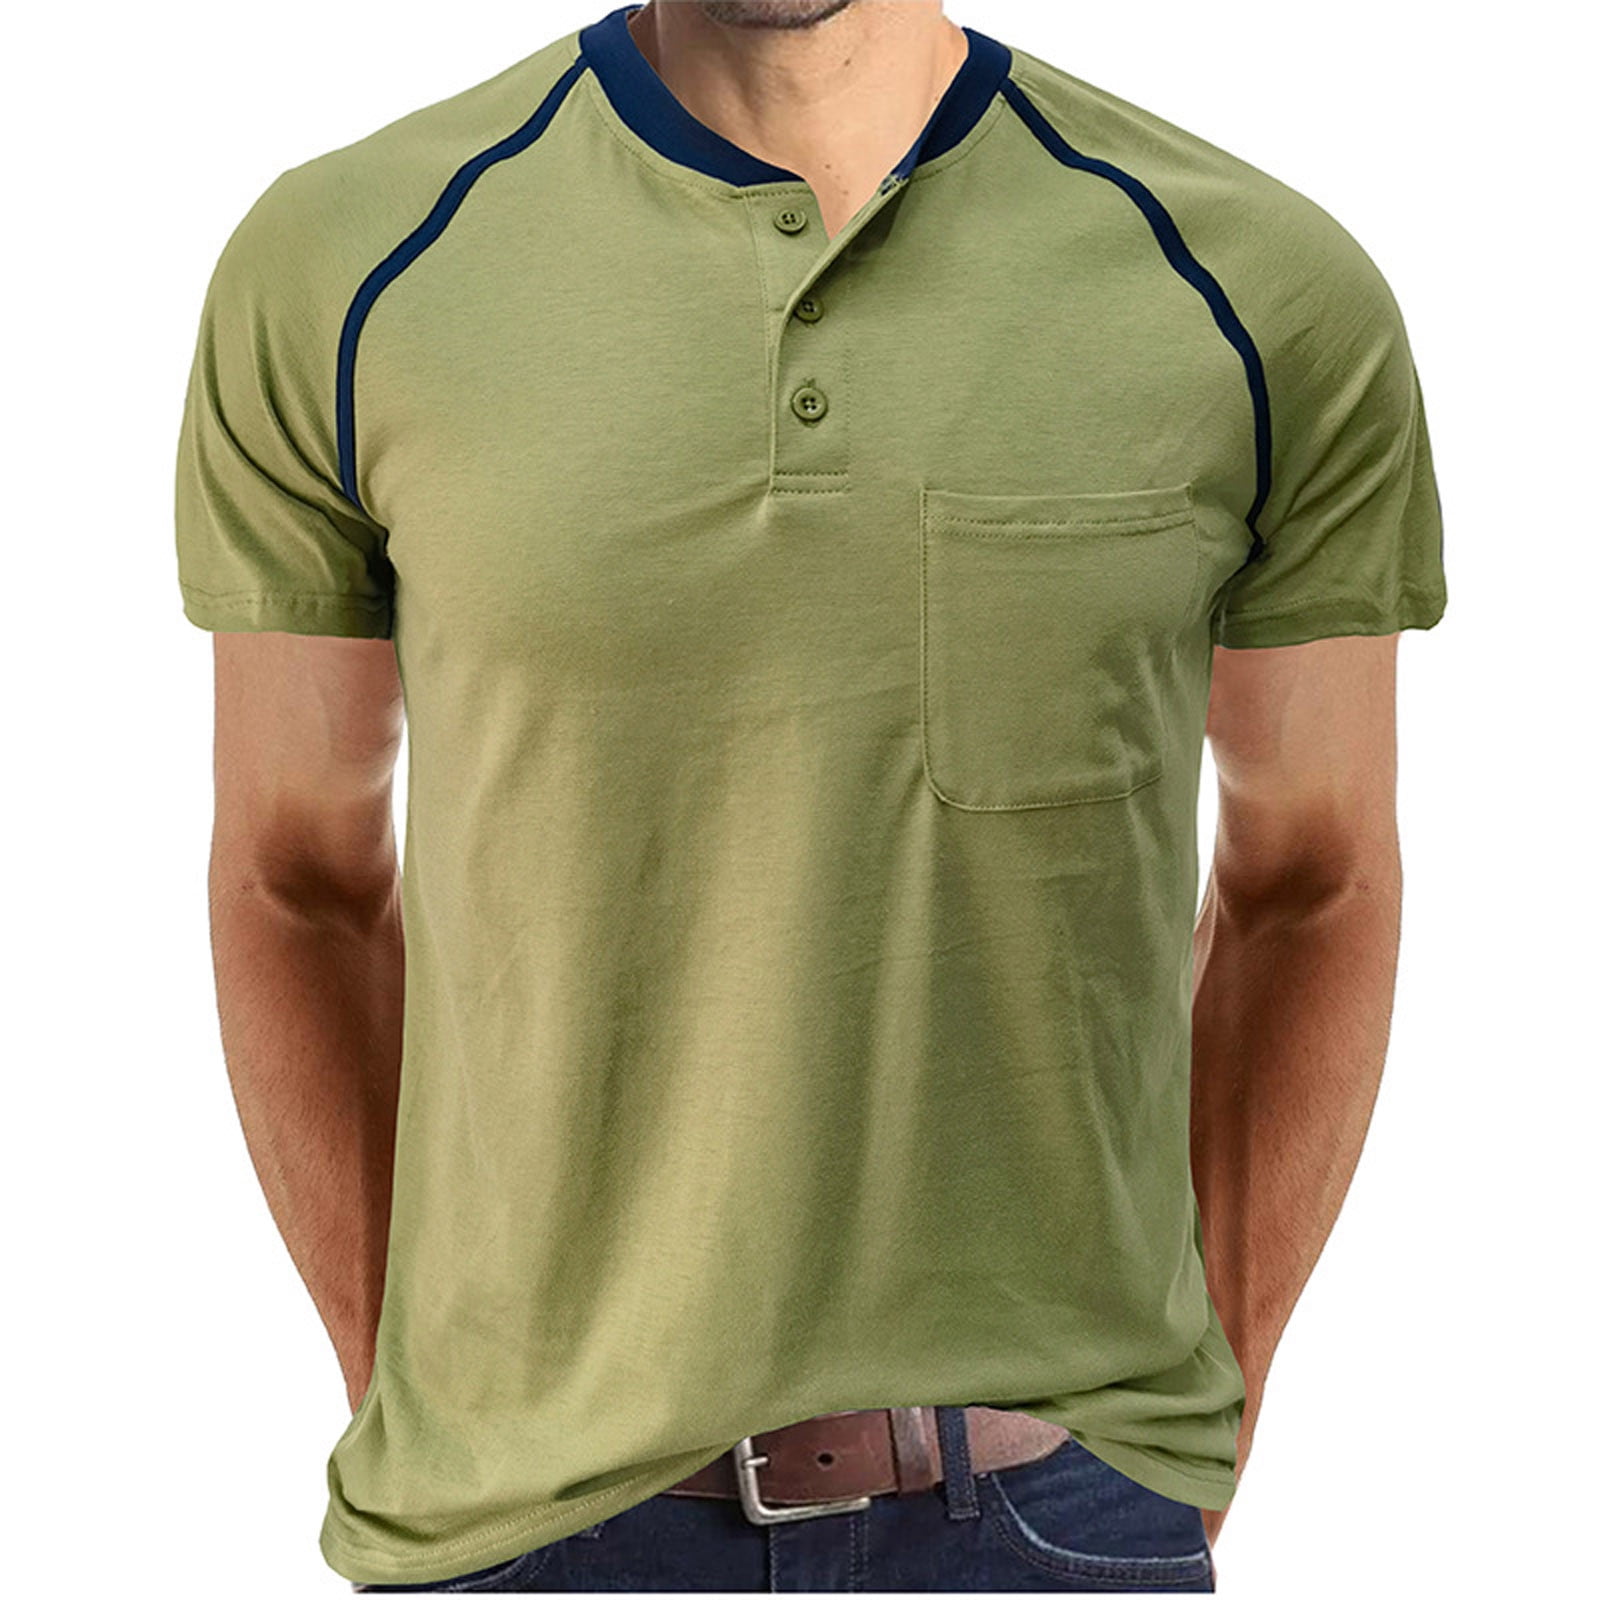 YYDGH Clearance Mens Henley Shirts Classic 3 Button Short Sleeve T ...